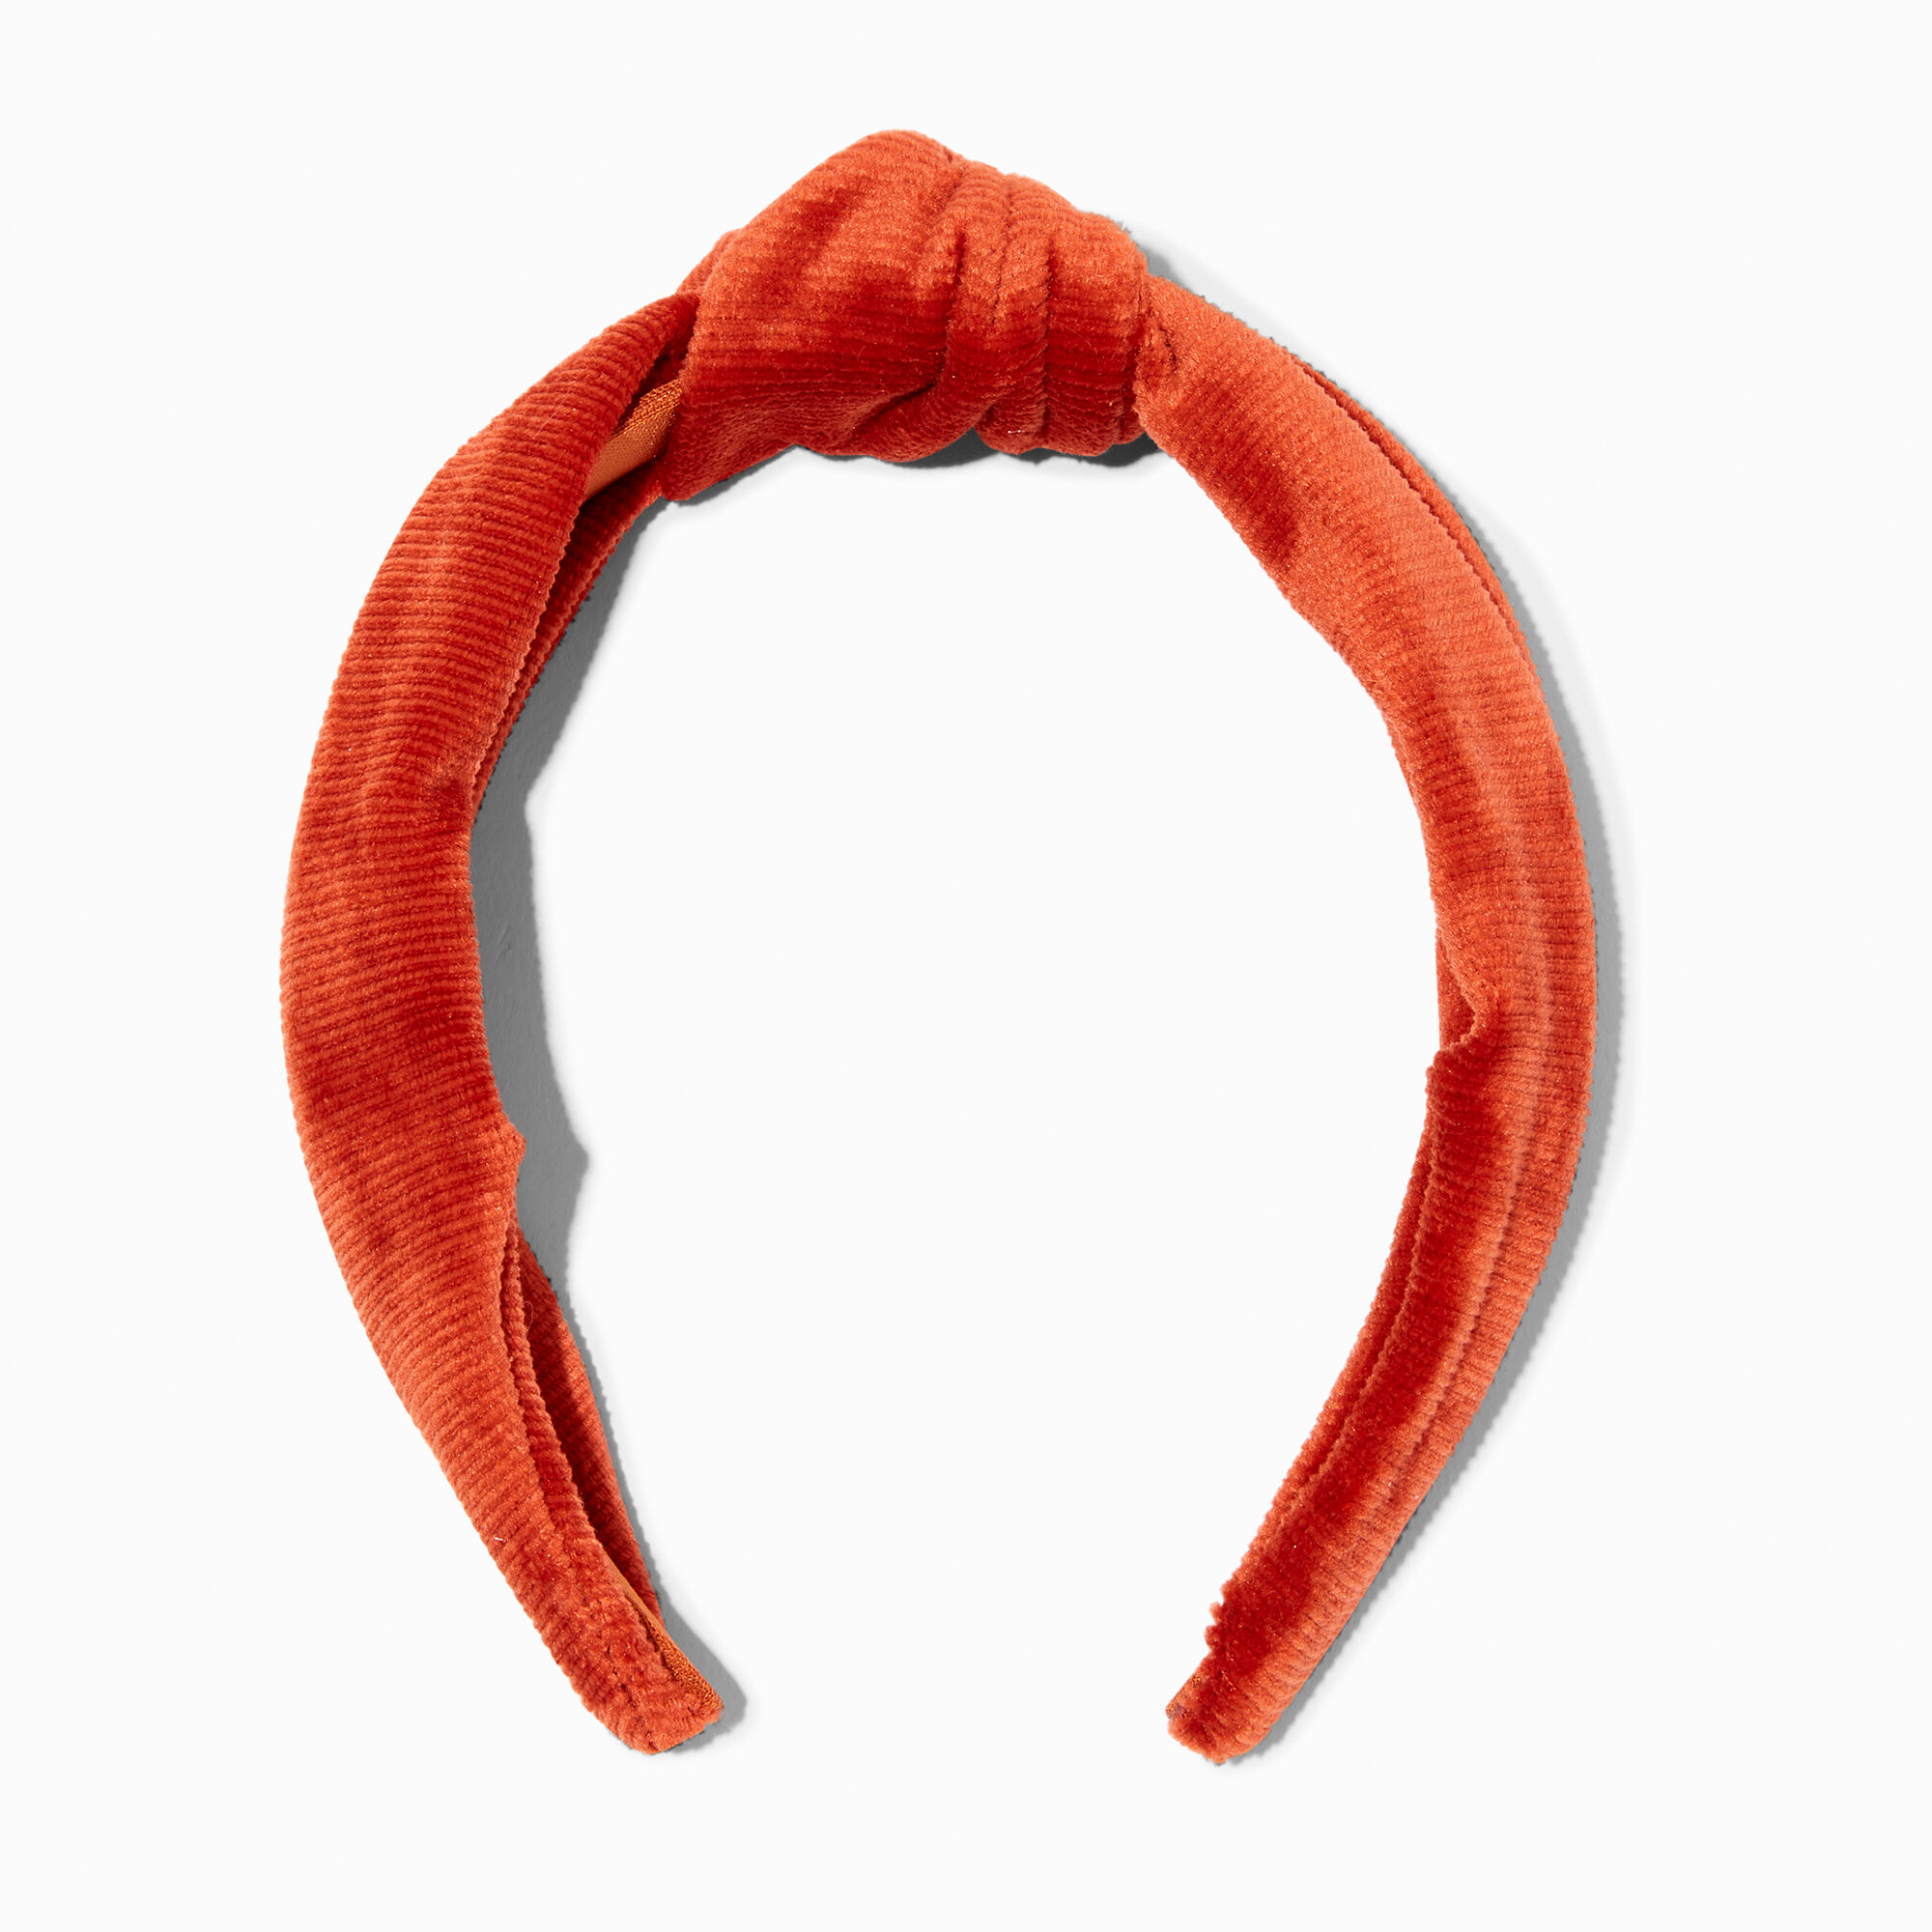 View Claires Copper Knotted Ribbed Knit Headband information